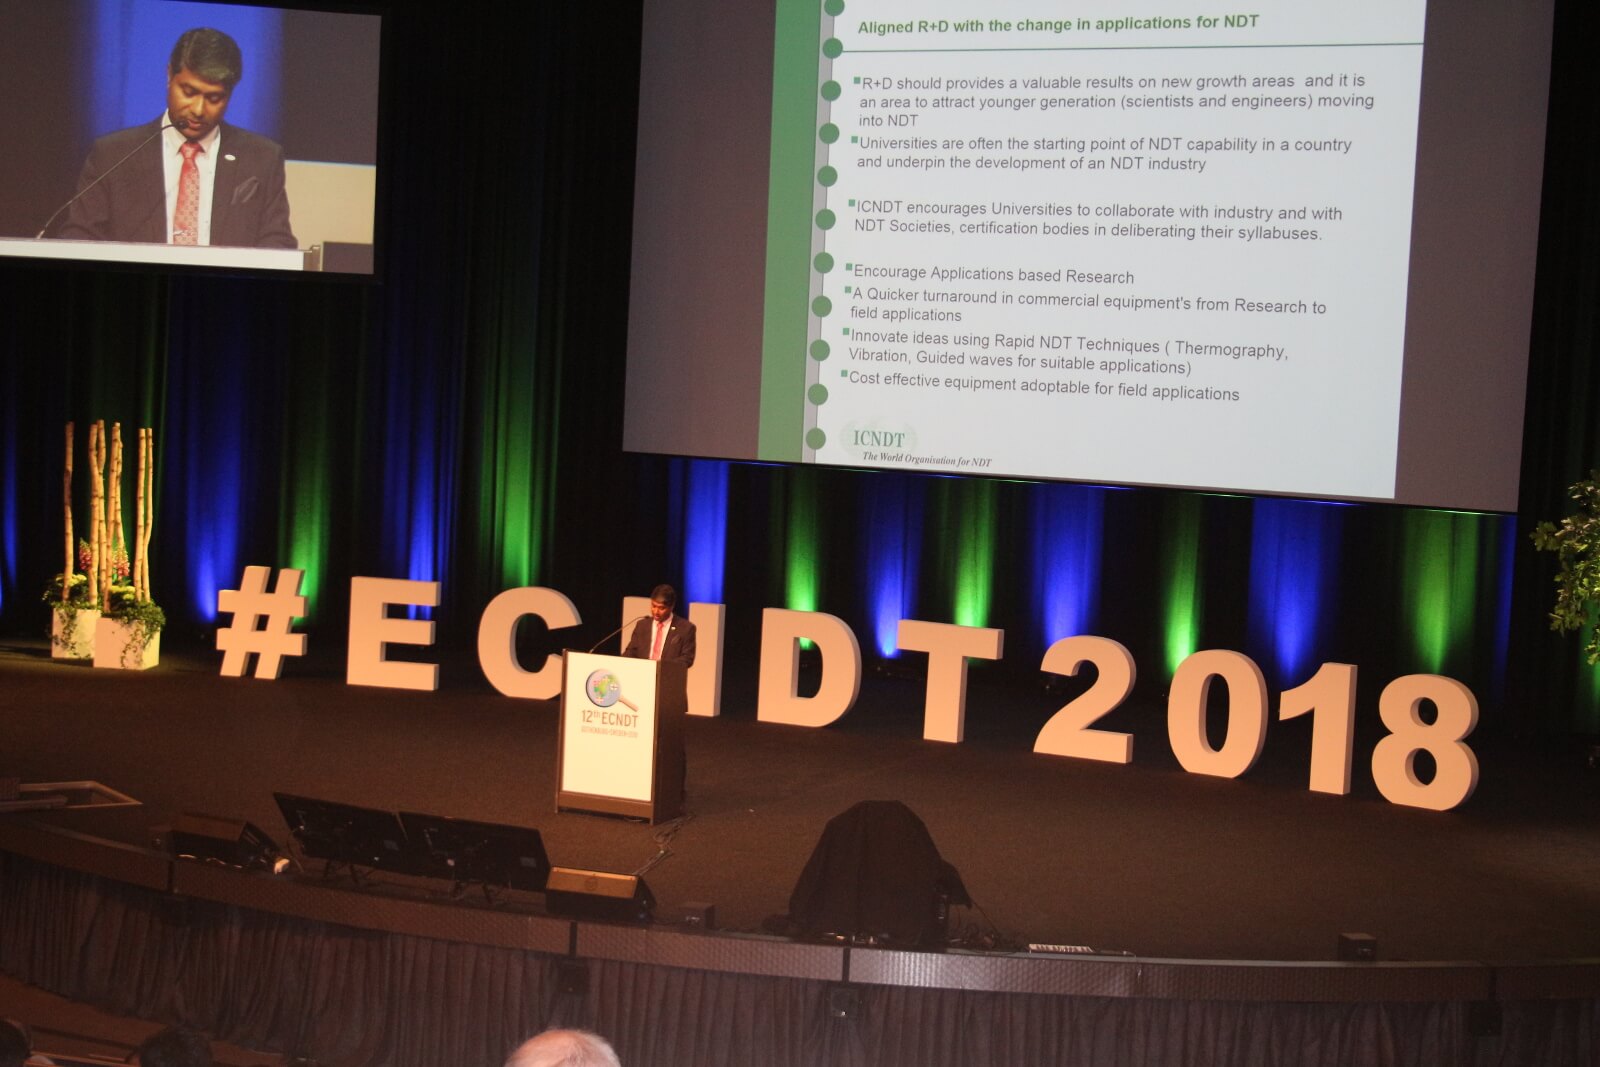 Opening ceremony of the 12th European conference of NDT (ECNDT-18), Gothenburg, Sweden